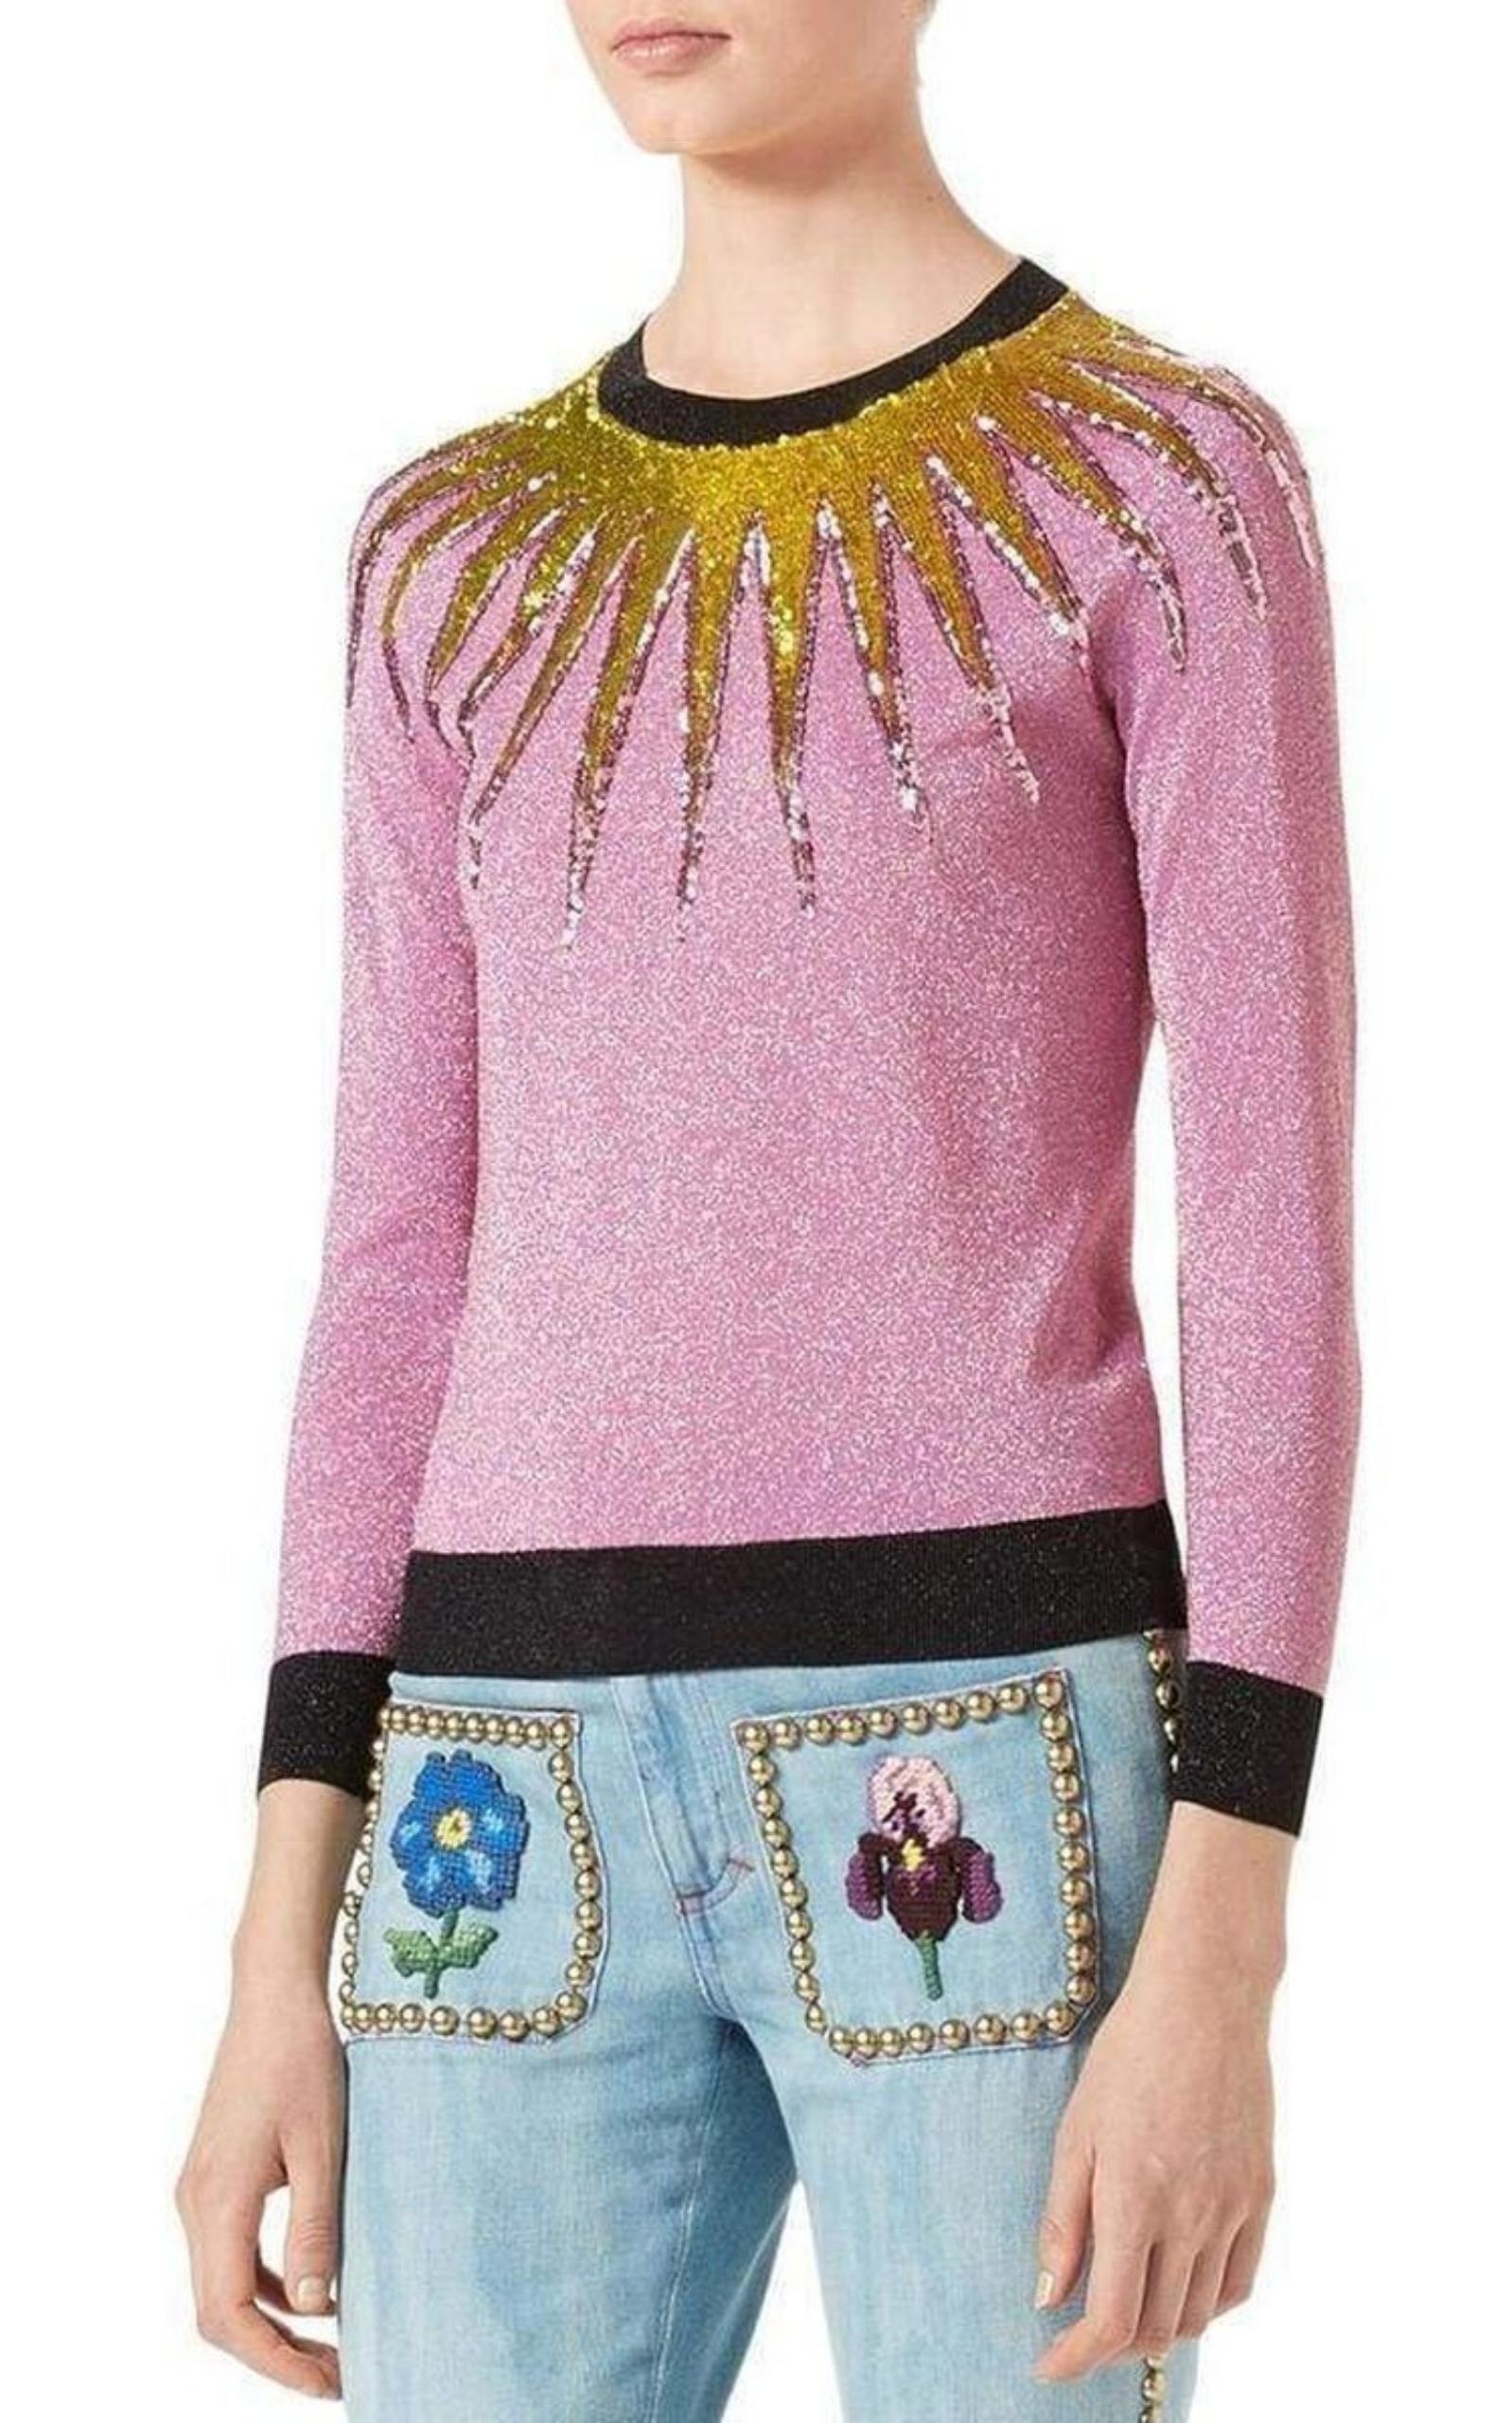  GucciEmbroidered Metallic Light Pink Sweater - Runway Catalog